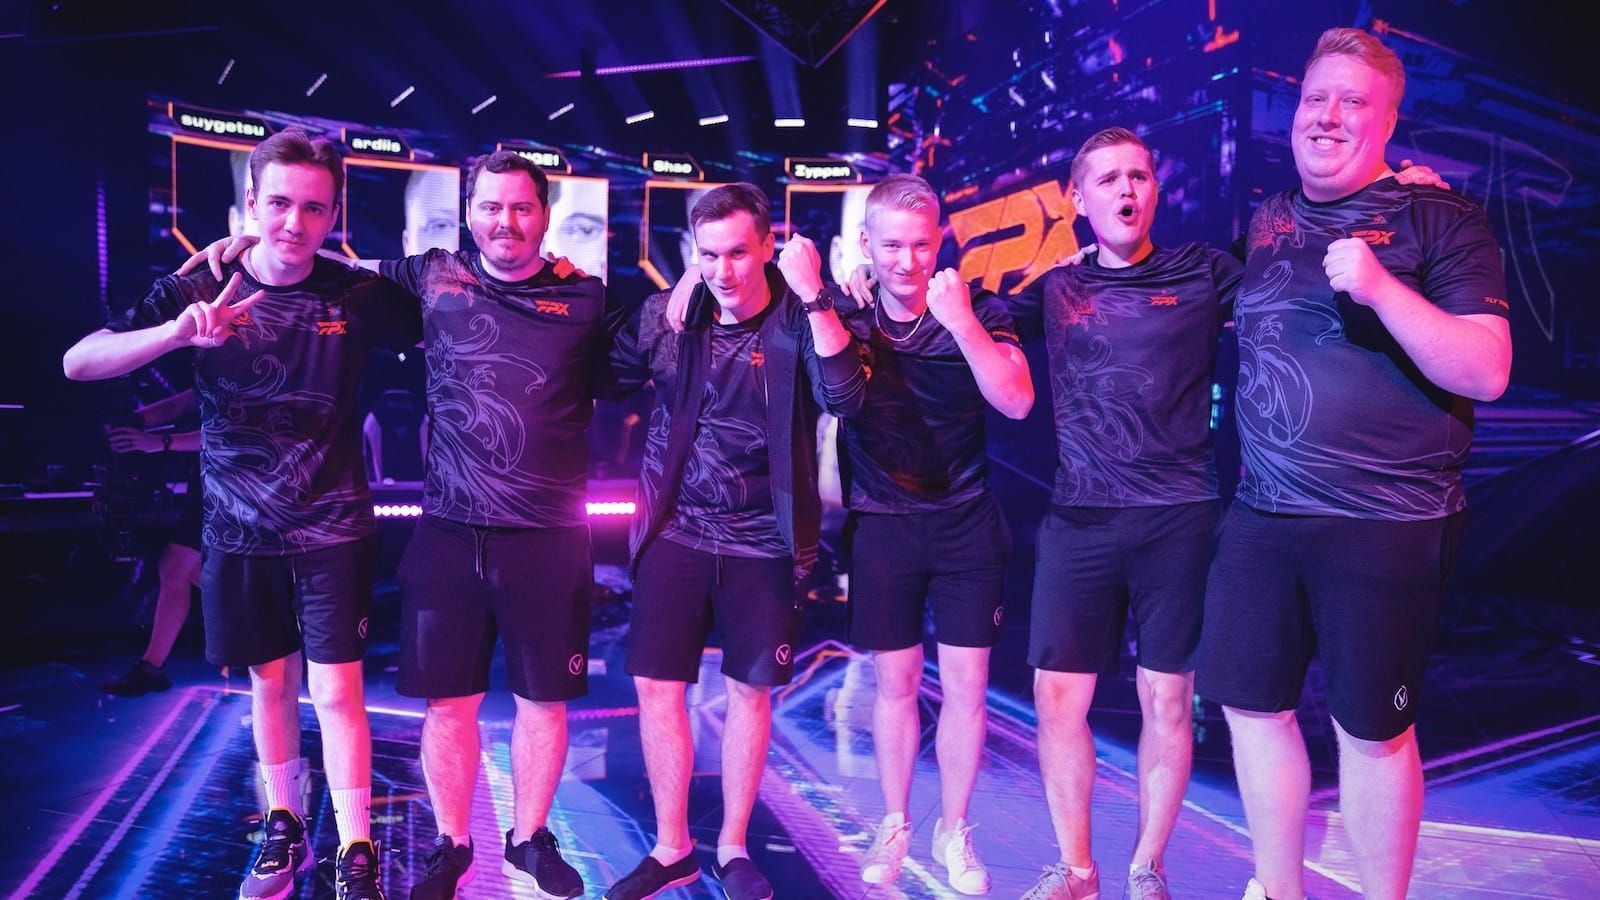 FunPlus Phoenix punch their ticket to Masters 2 following victory over M3  Champions in EMEA Challengers Playoffs